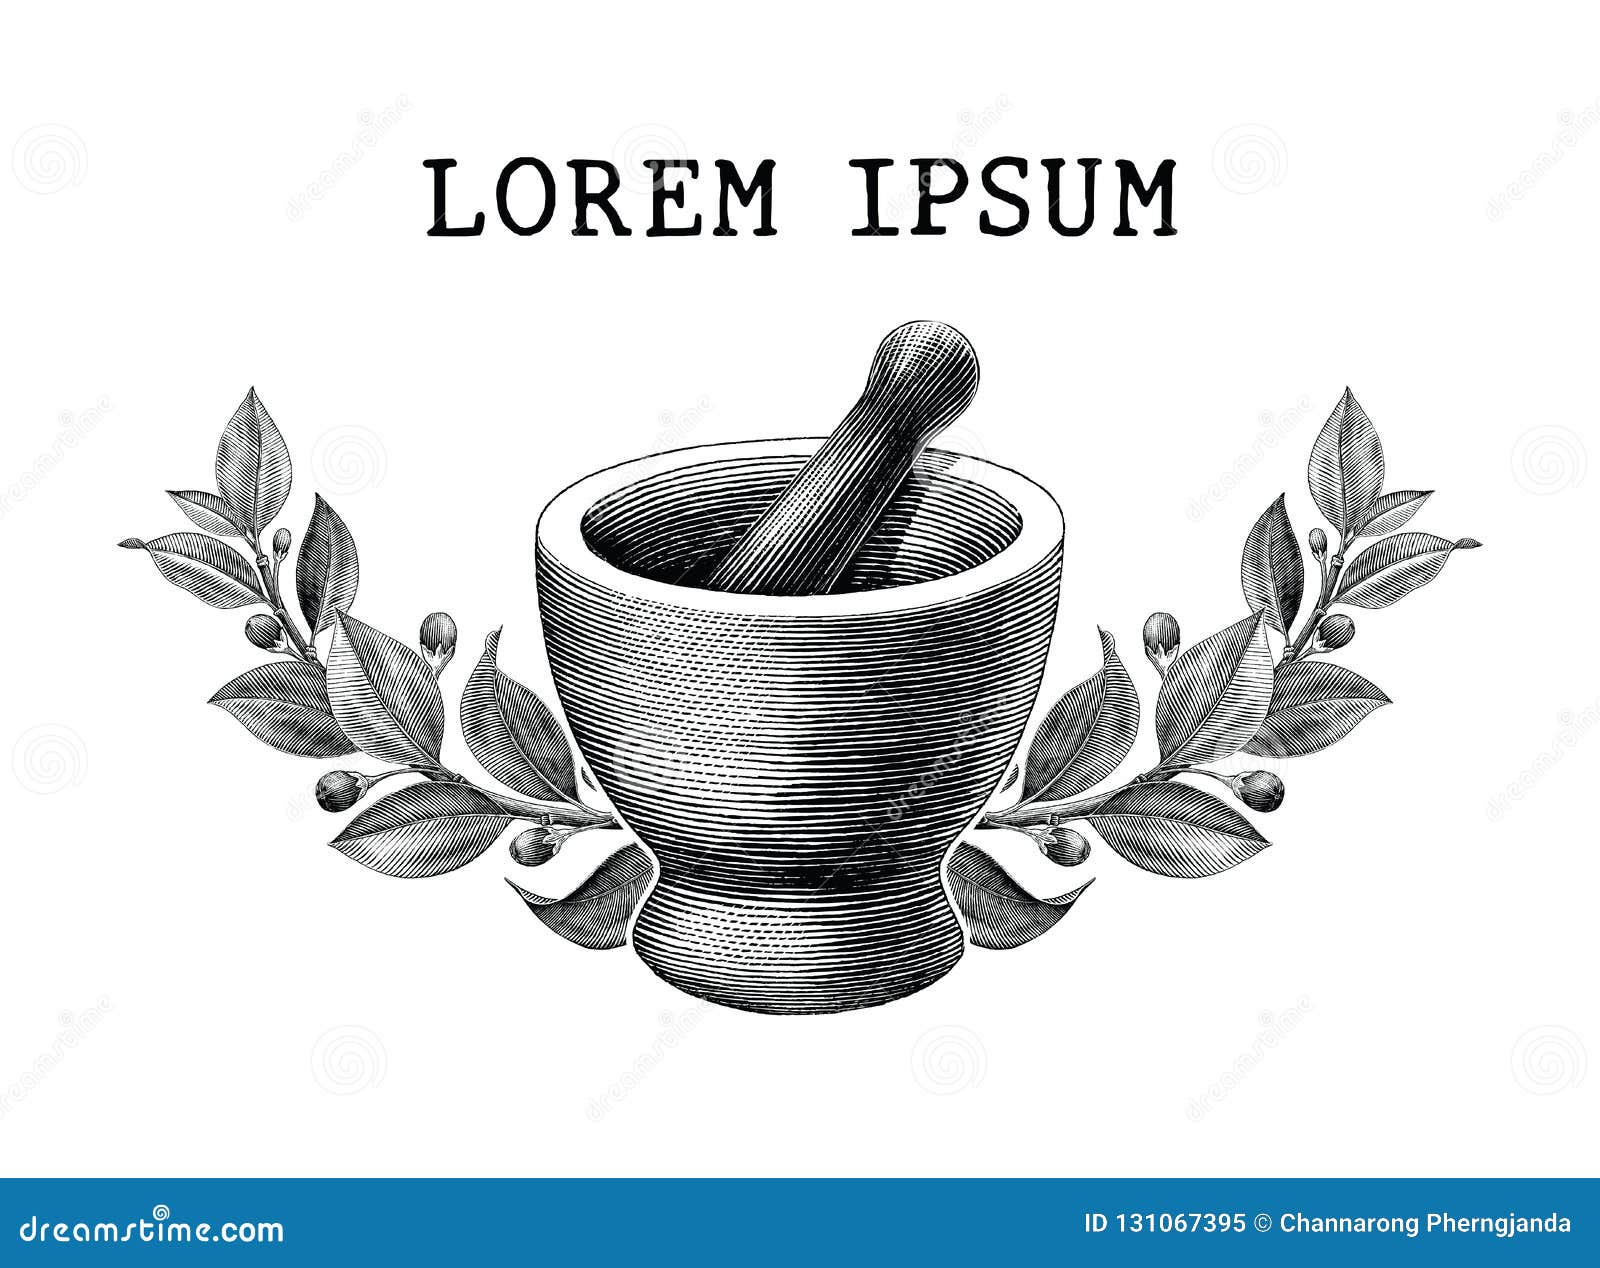 mortar and pestle with herbs frame vintage engraving  logo  on white background,logo of pharmacy and medicine